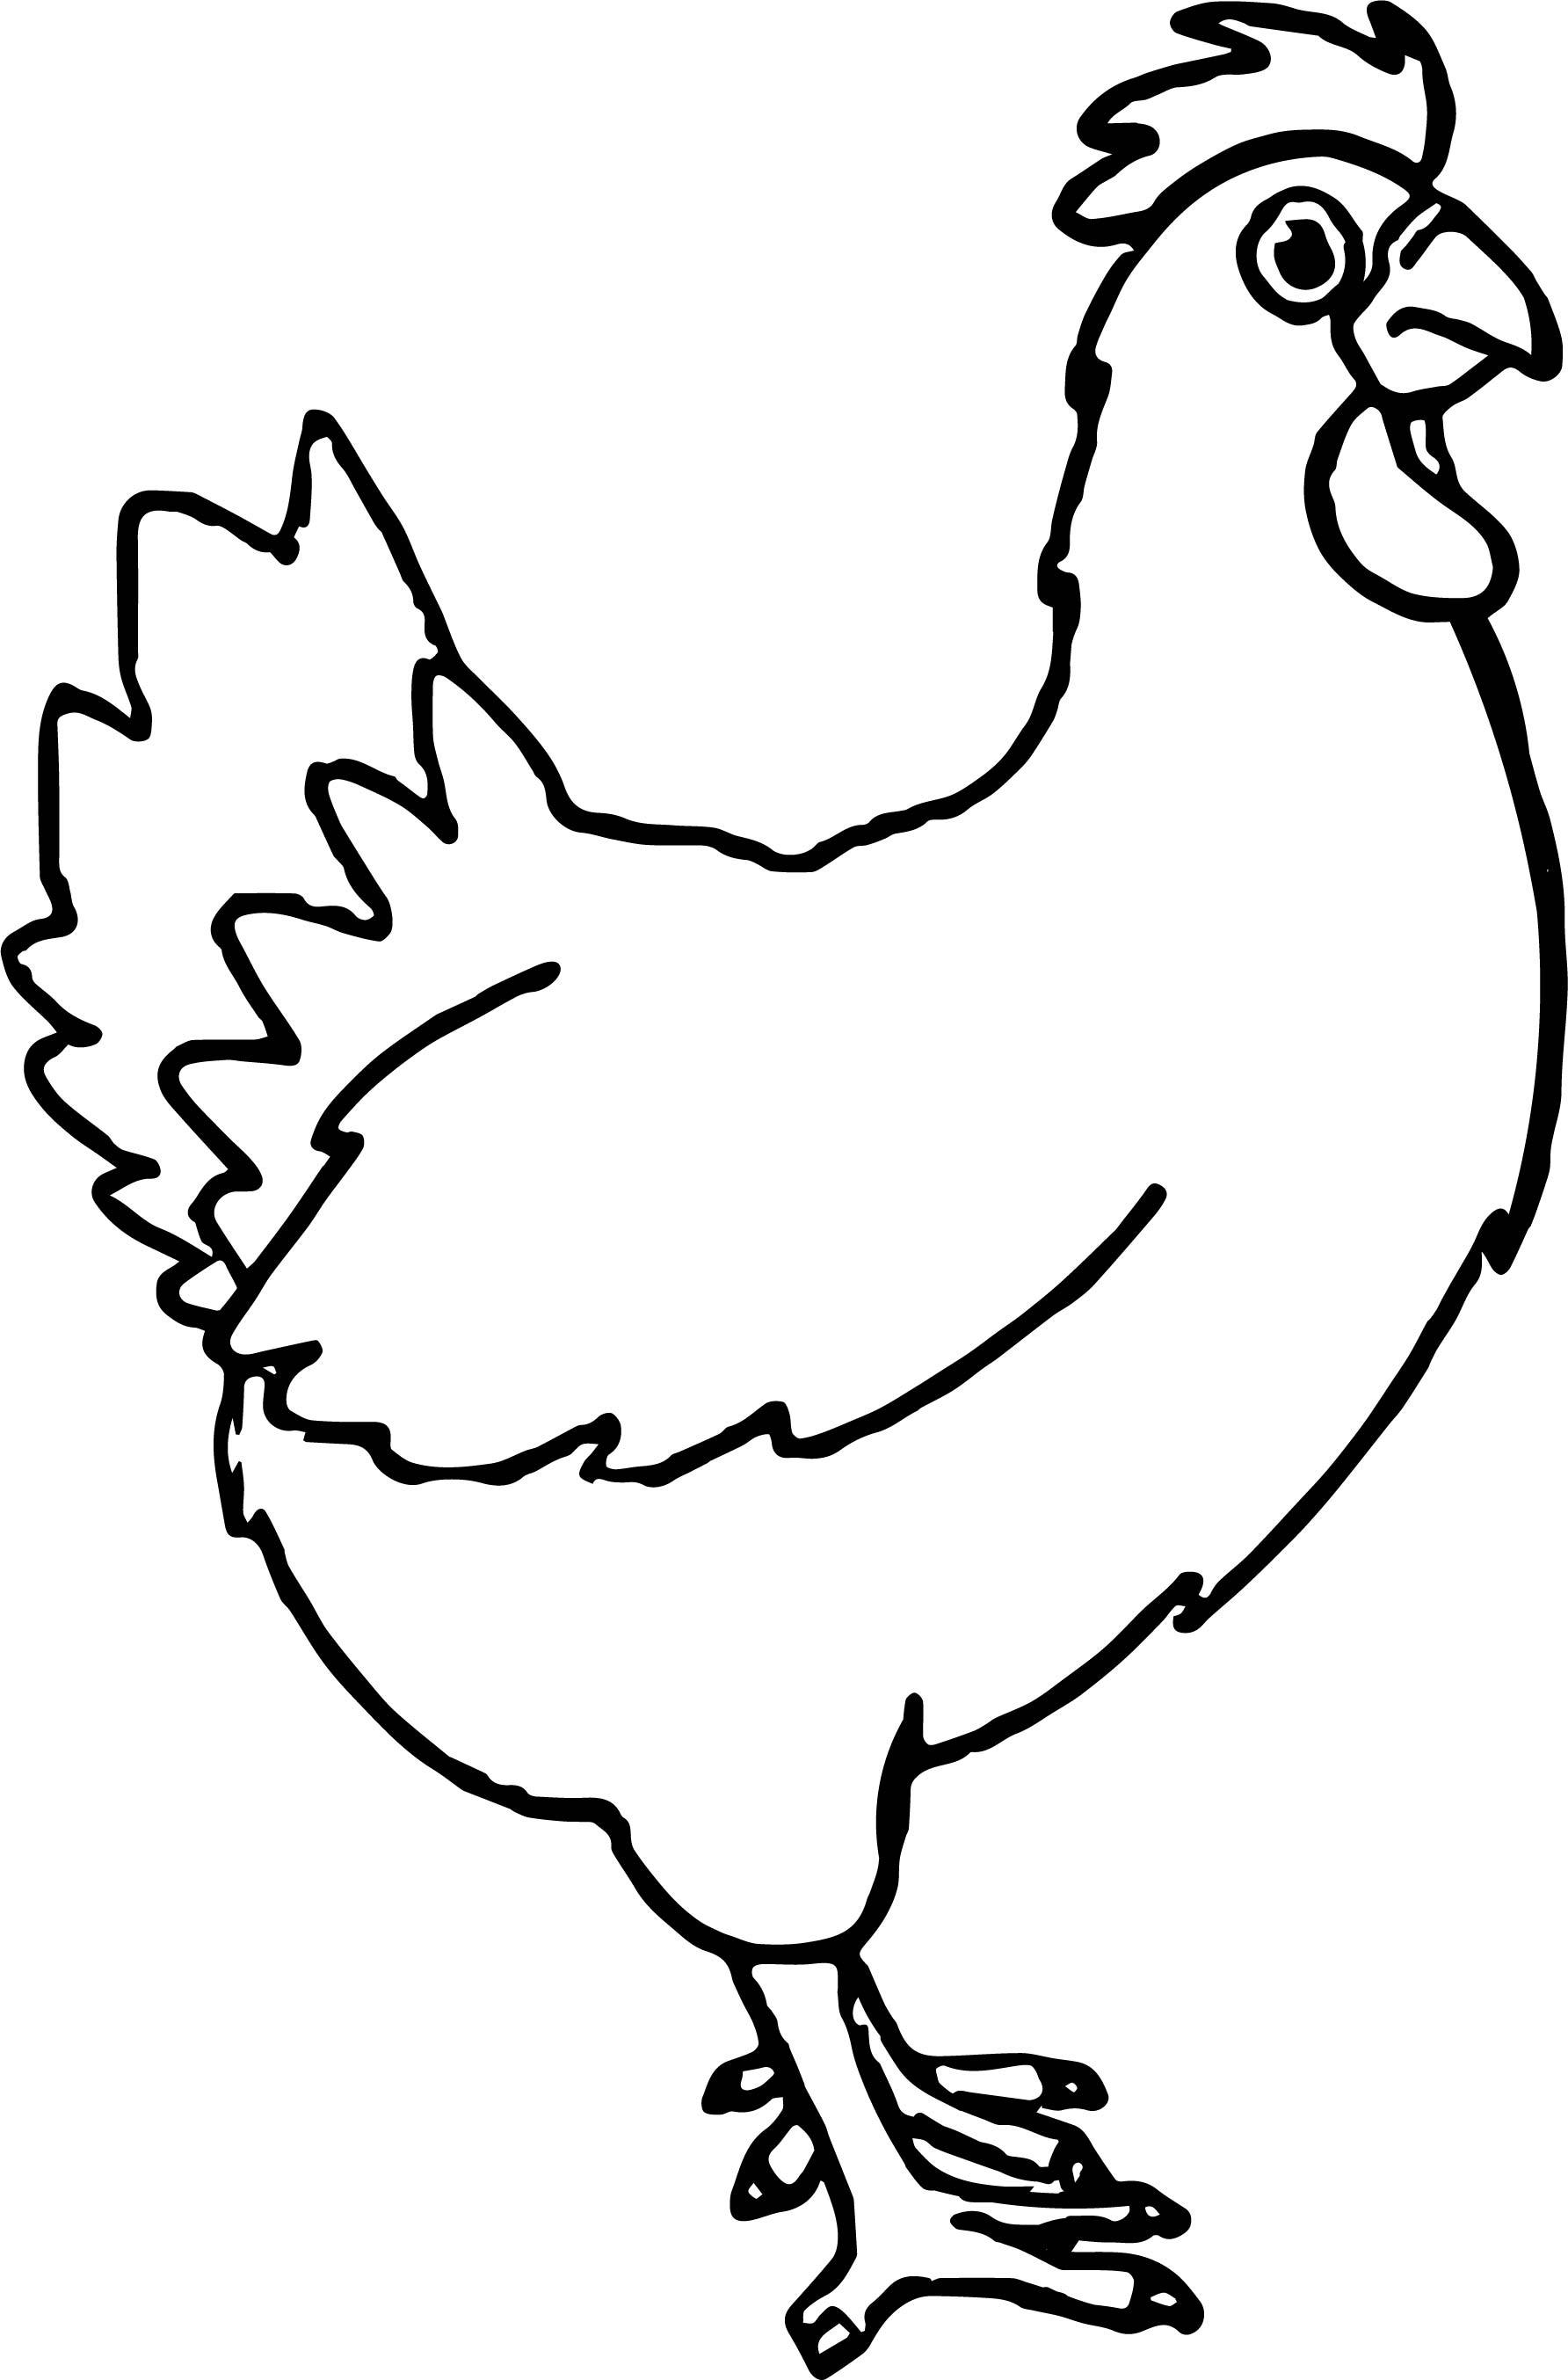 Finch Coloring Page at GetColorings.com | Free printable colorings ...